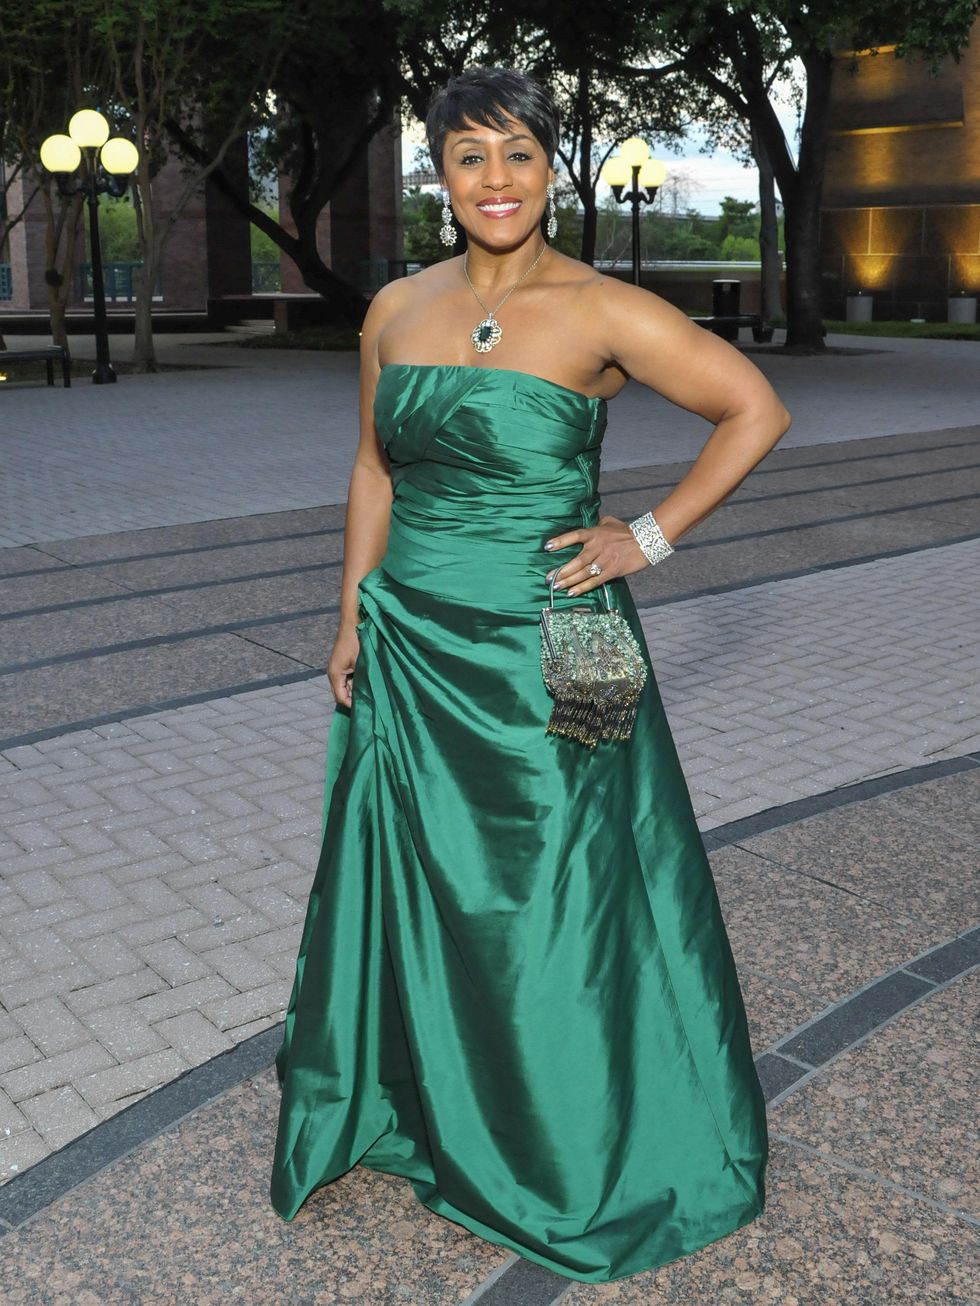 Dazzling ladies break out the wow gowns for Houston Grand Opera Ball ...